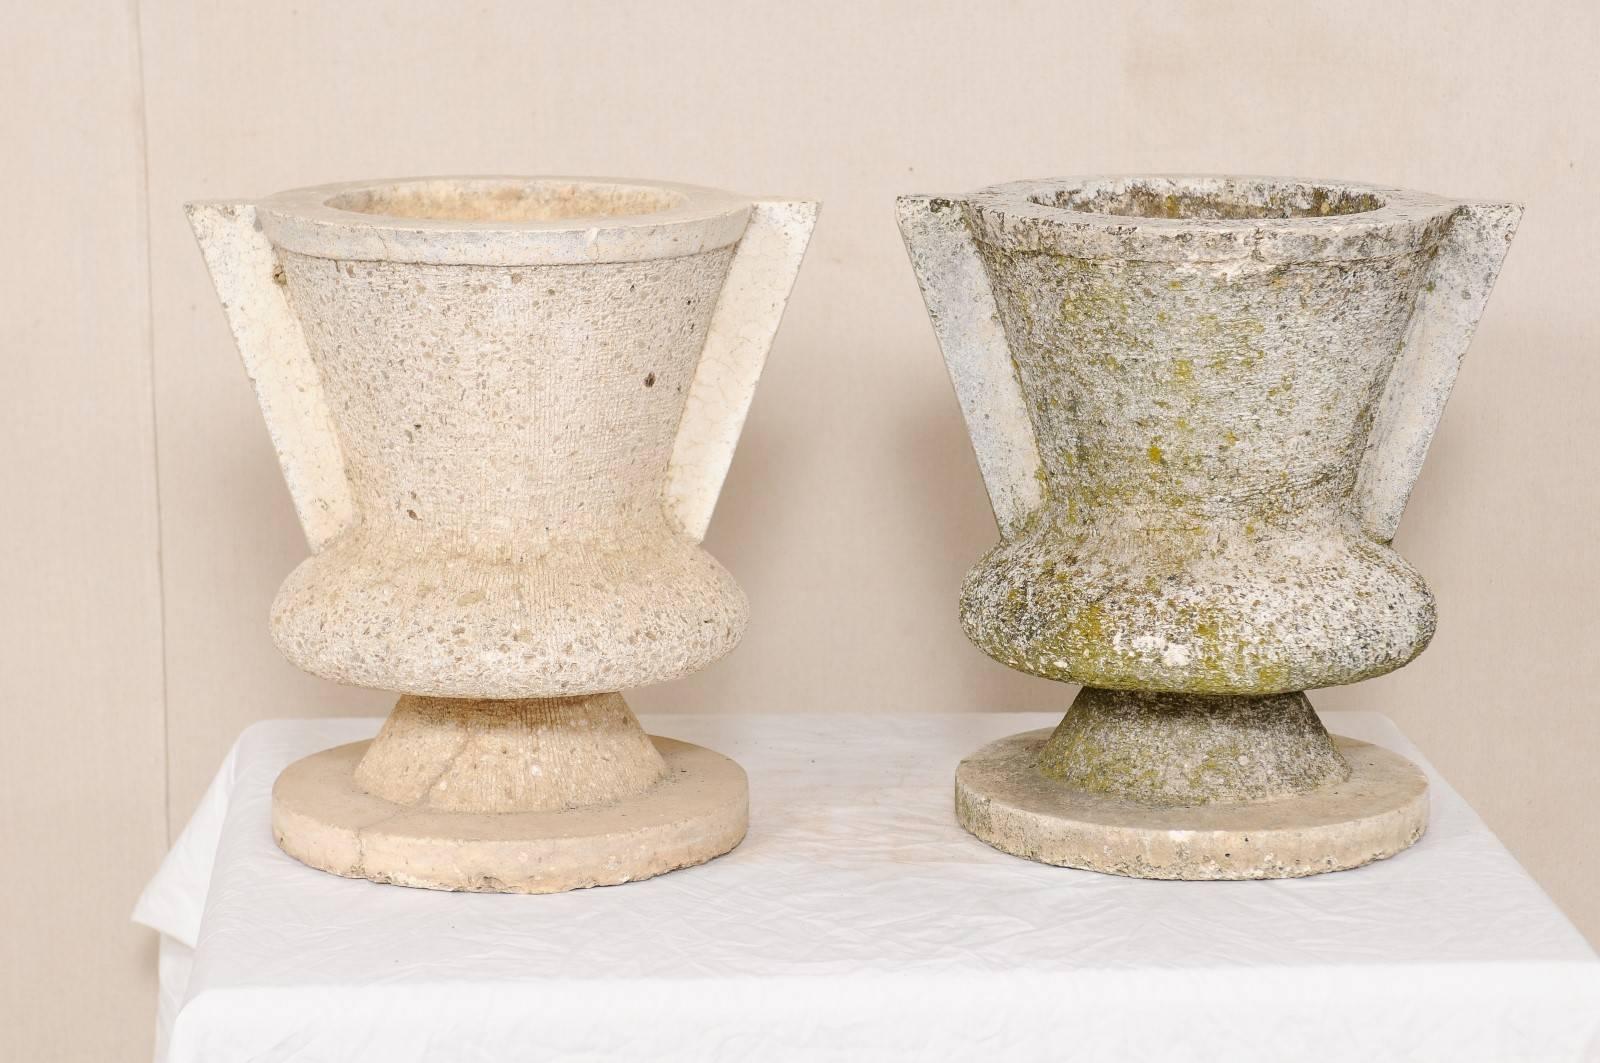 A pair of French urns. This pair of vintage French planters have been made of cast stone and have a modern design element to them. These shapely urns have a solid handle piece at either side, and are raised up on circular platform bases. These urns